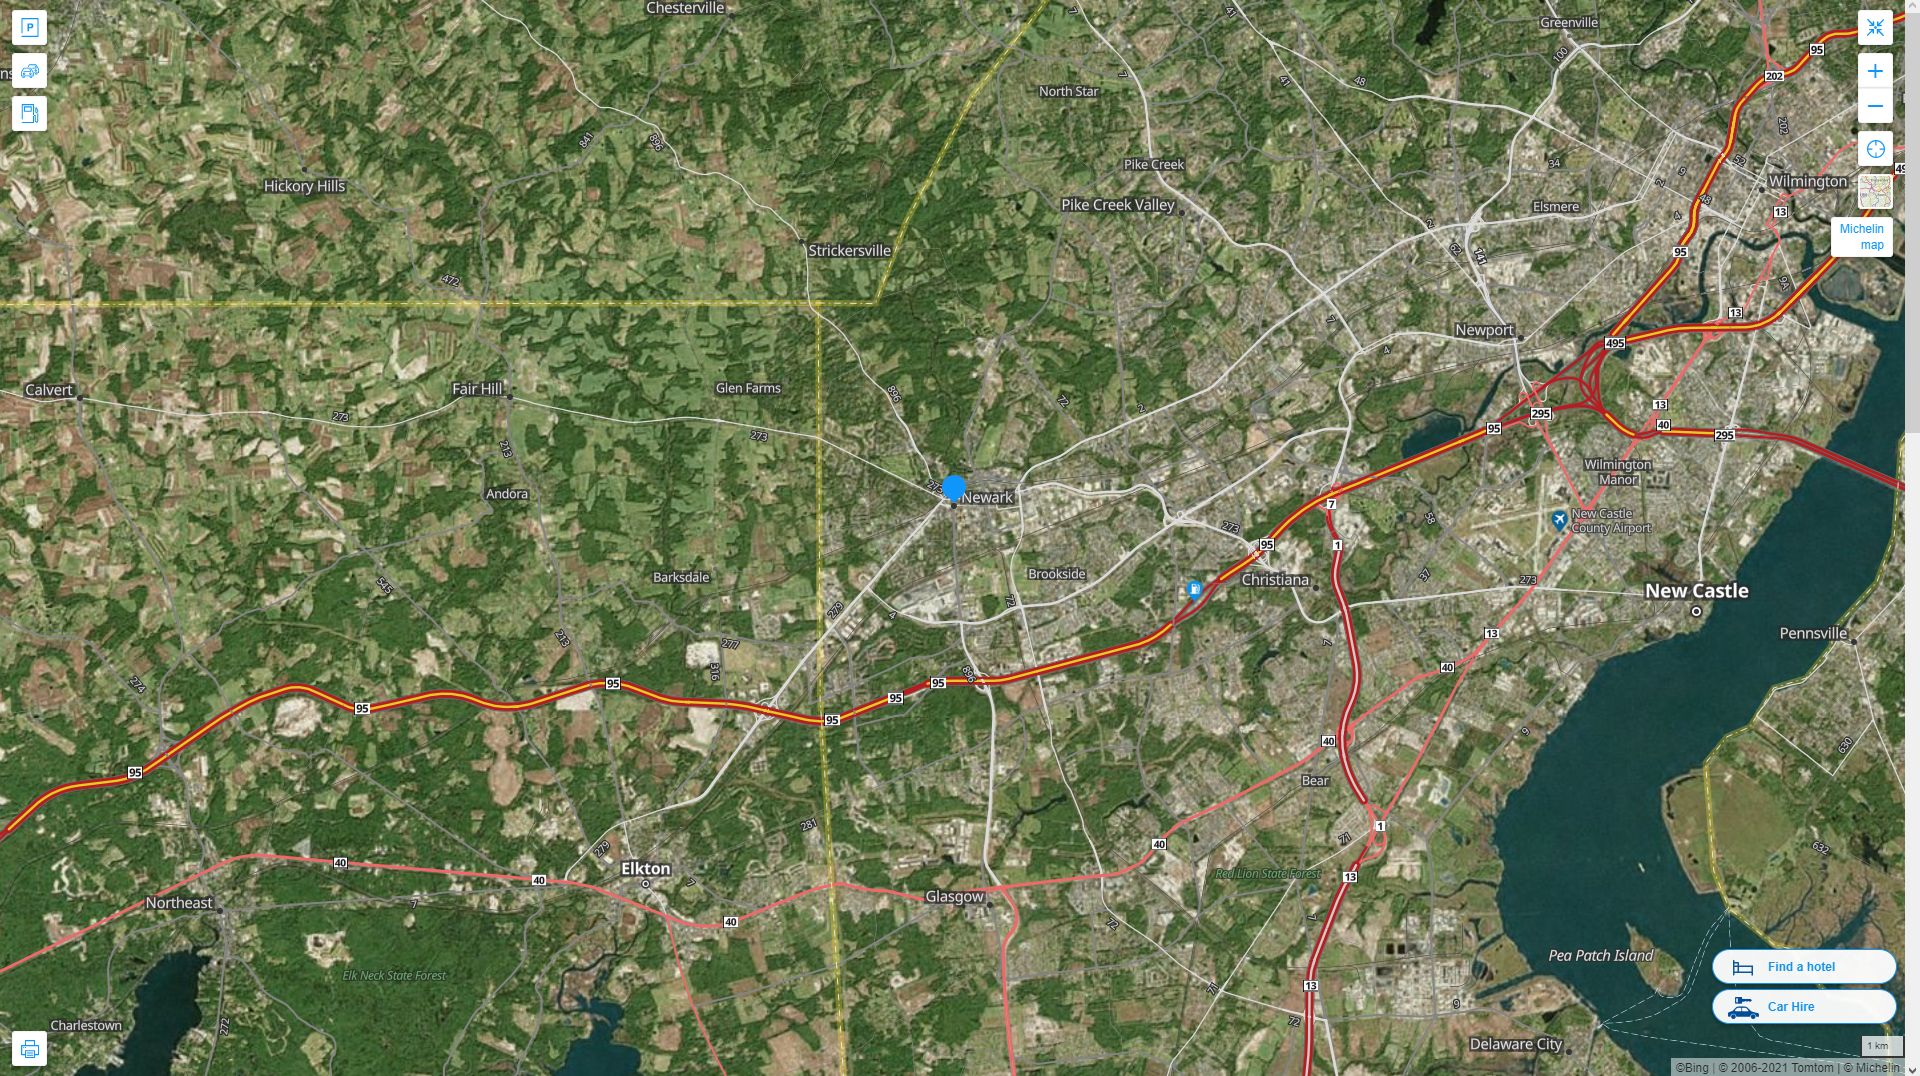 Newark Delaware Highway and Road Map with Satellite View